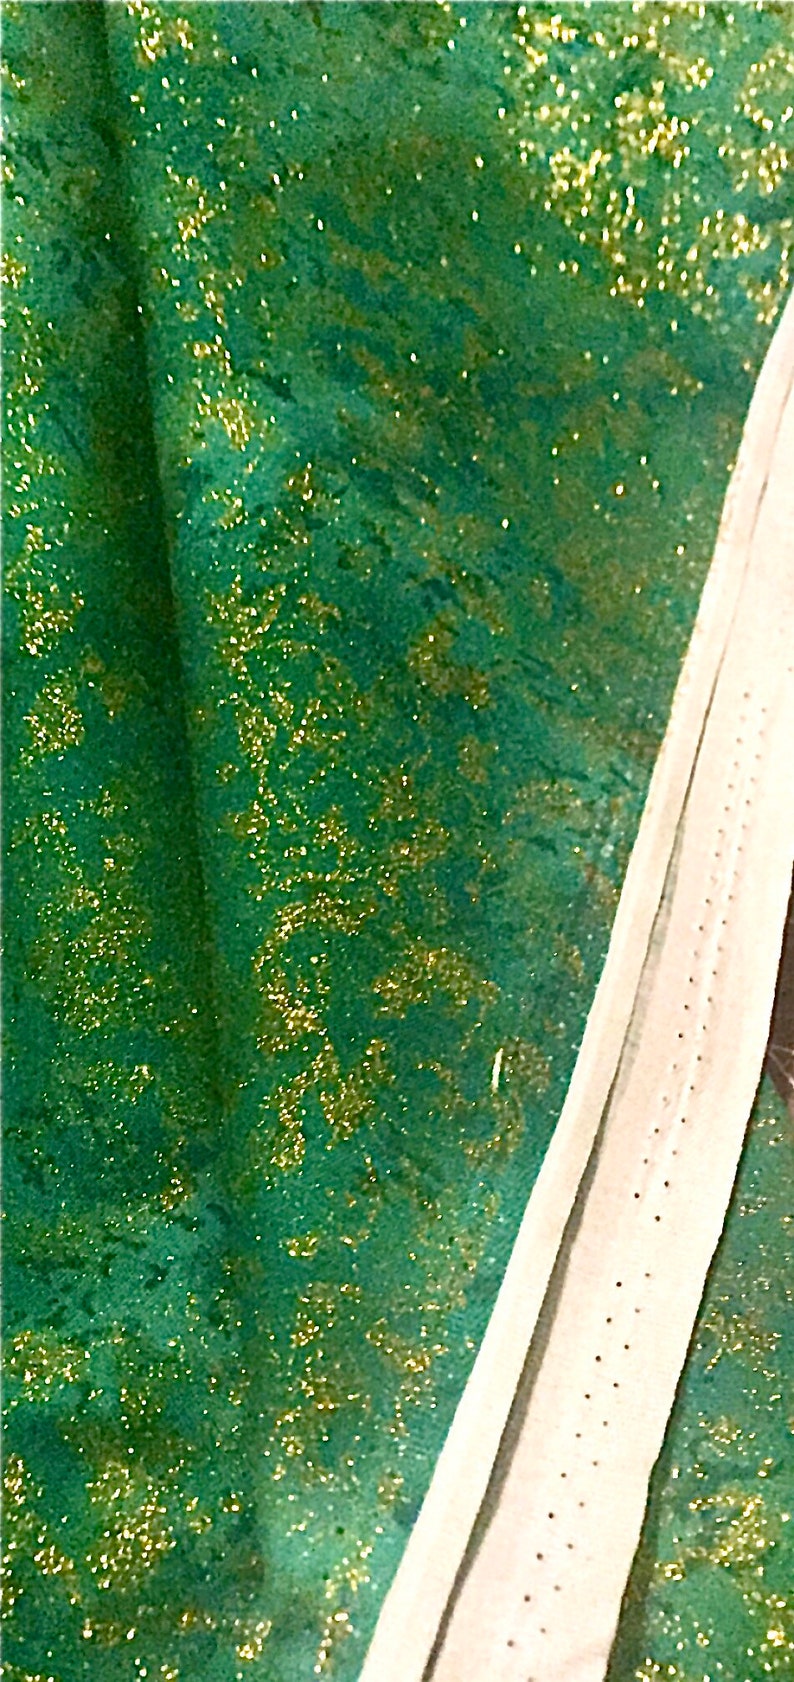 Fairy Frost Fabric Evergreen Gold Glitter quilt cotton sewing material, Listed by the Yard and Half Yard continuous cut, Michael Miller image 8